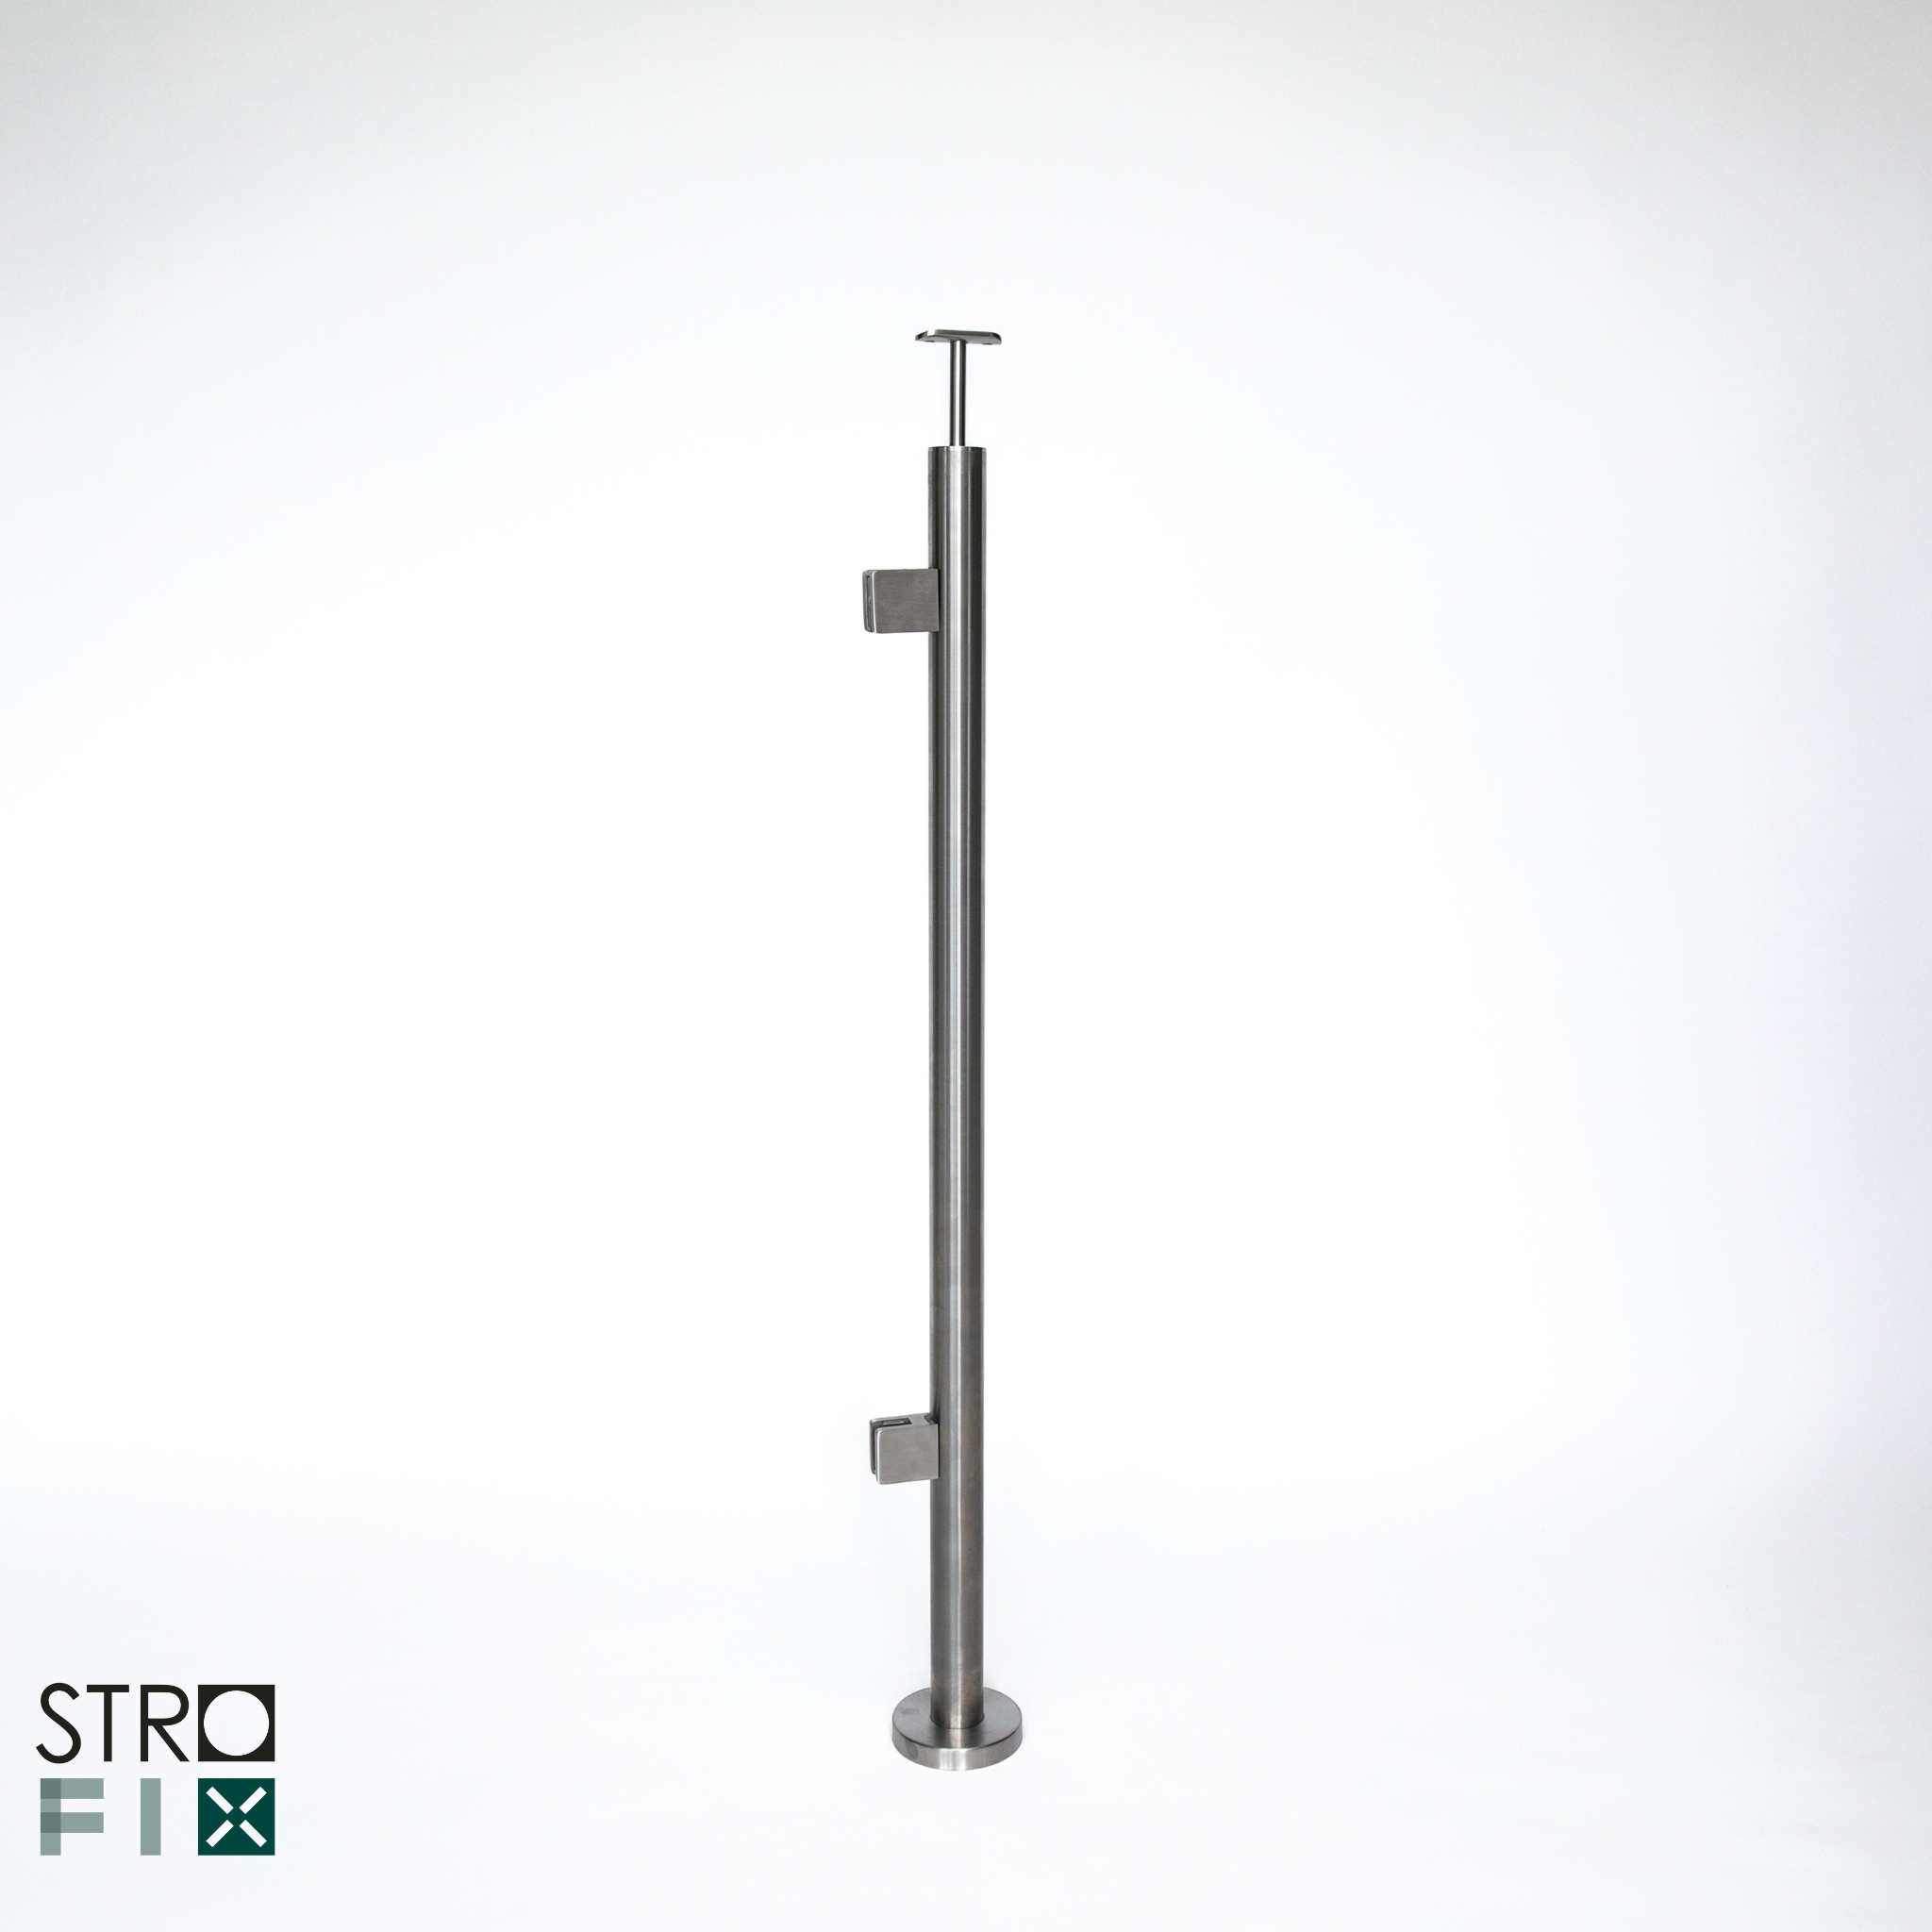 Glass railing system for a flat surface - 42.4 - StroFIX